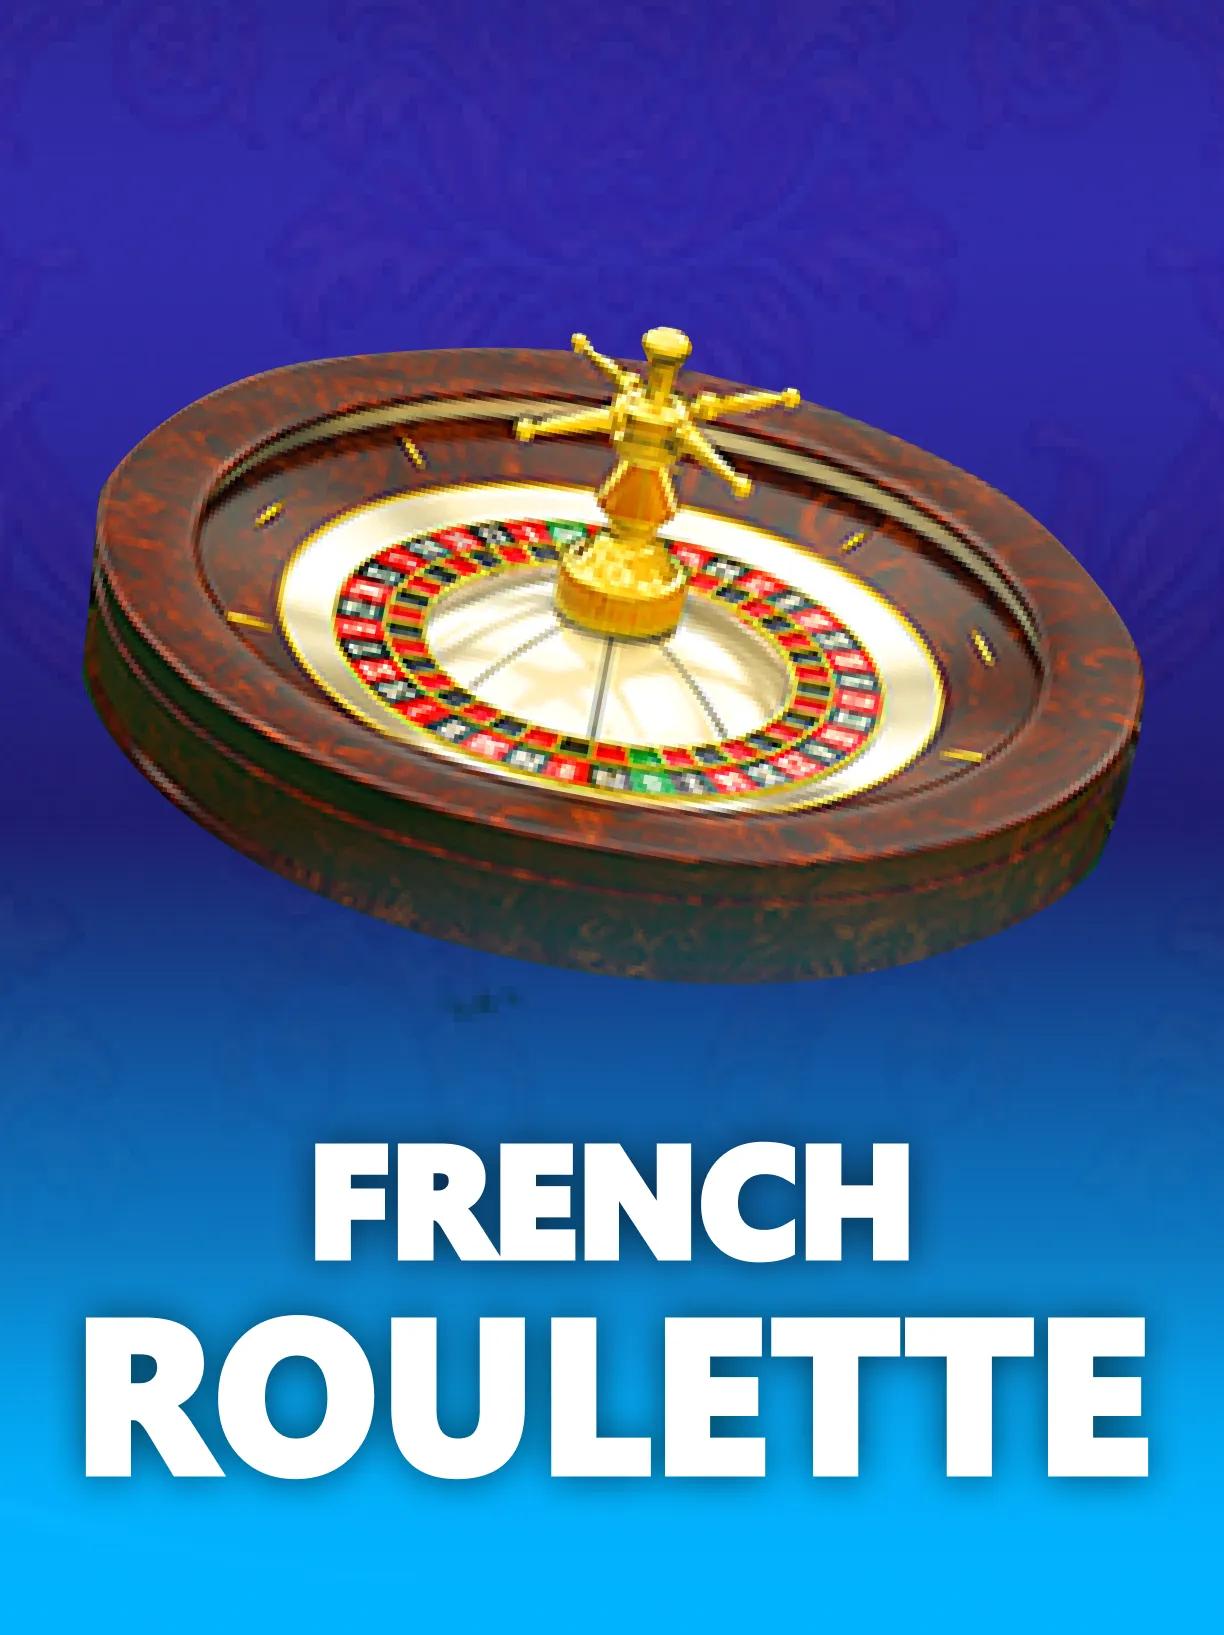 French_Roulette_square.webp